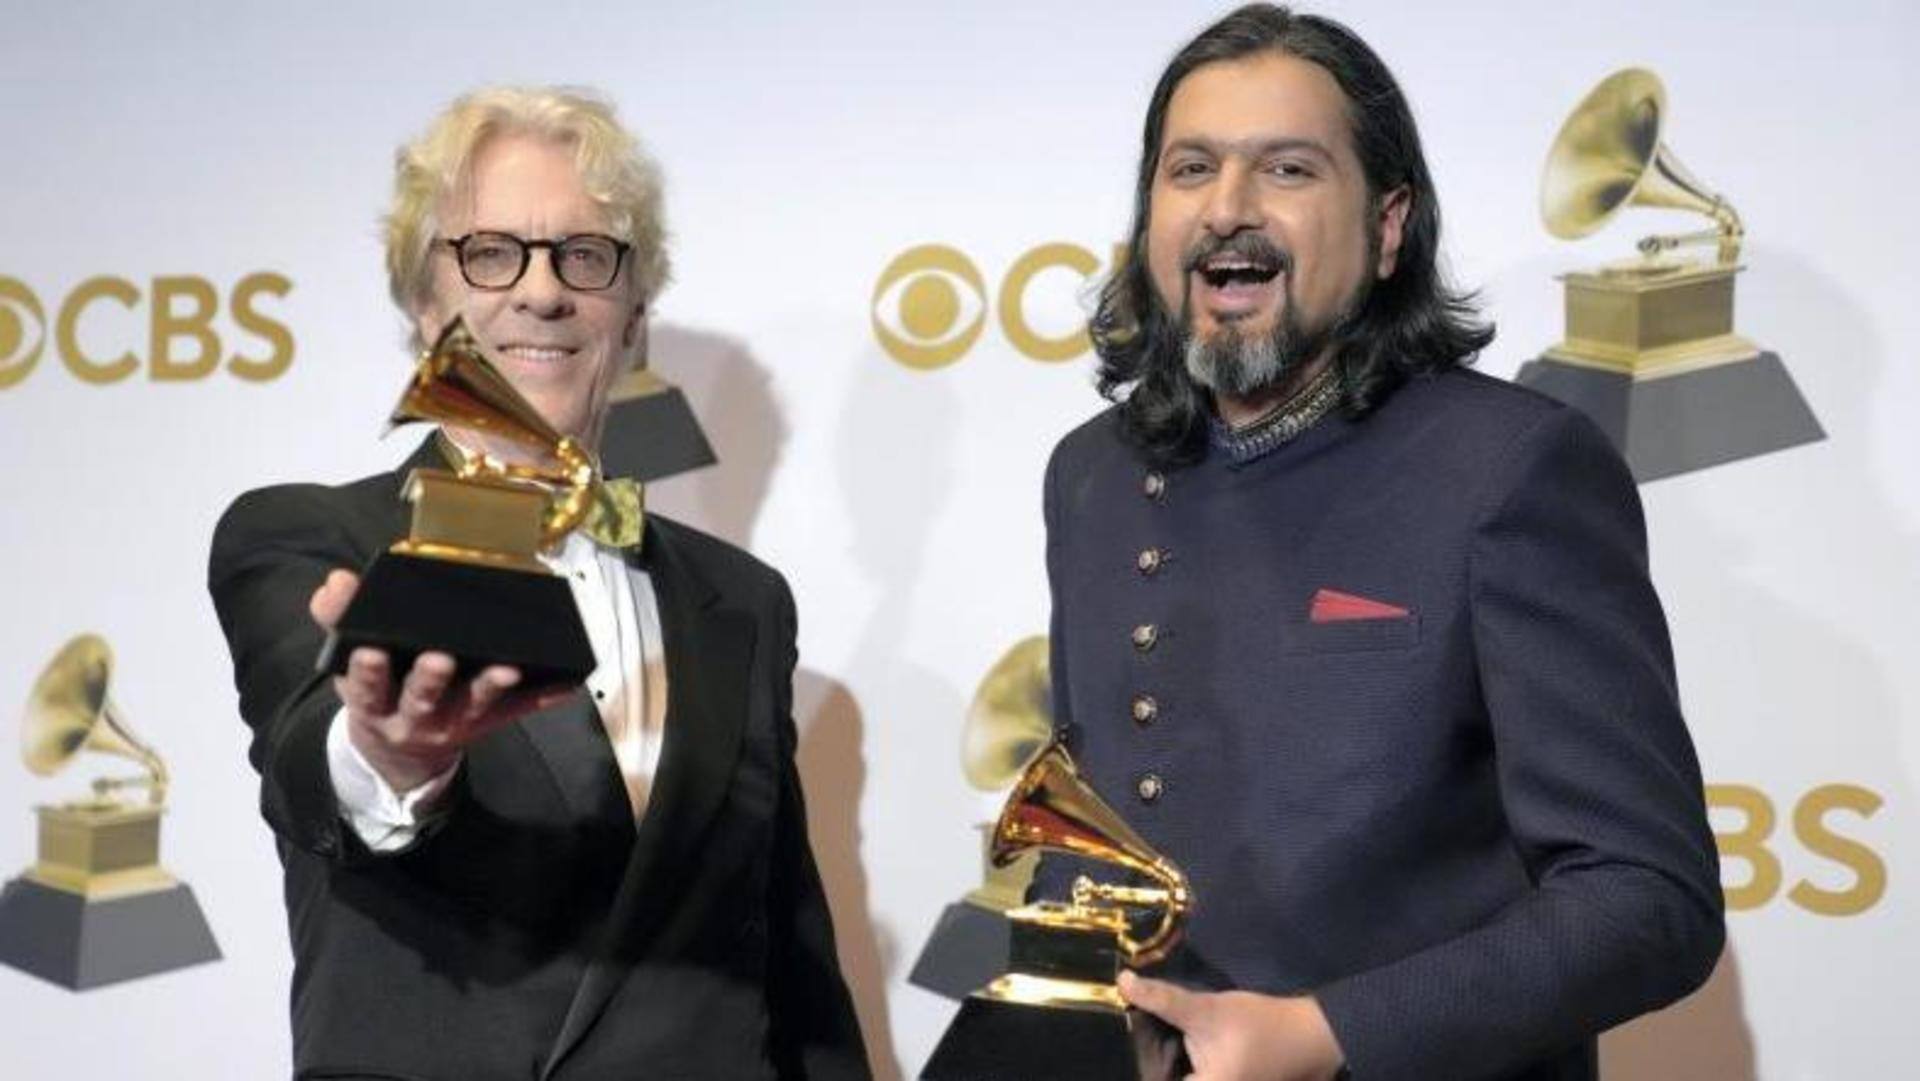 'Feels absolutely surreal': Ricky Kej reacts after third Grammy win